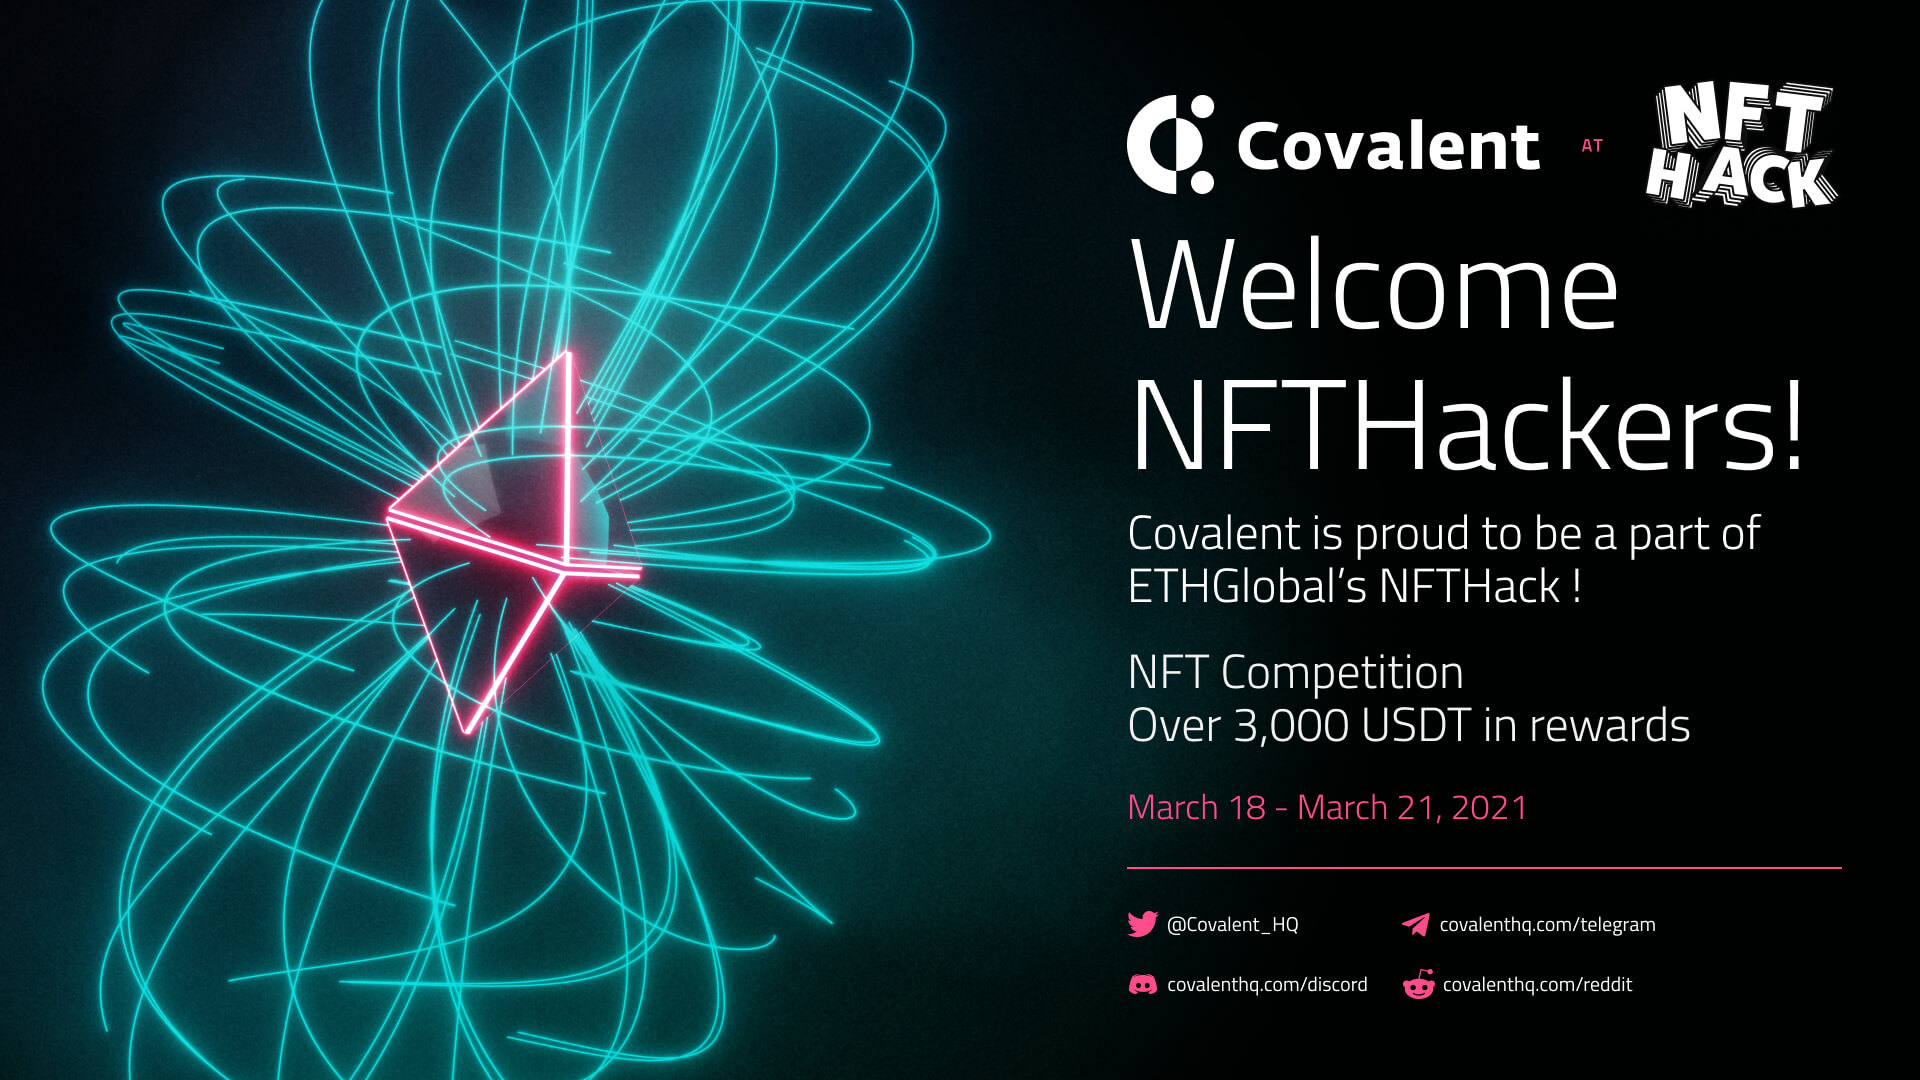 Design and Build with the Covalent API at NFT Hack 2021 to win over $3000 in prizes